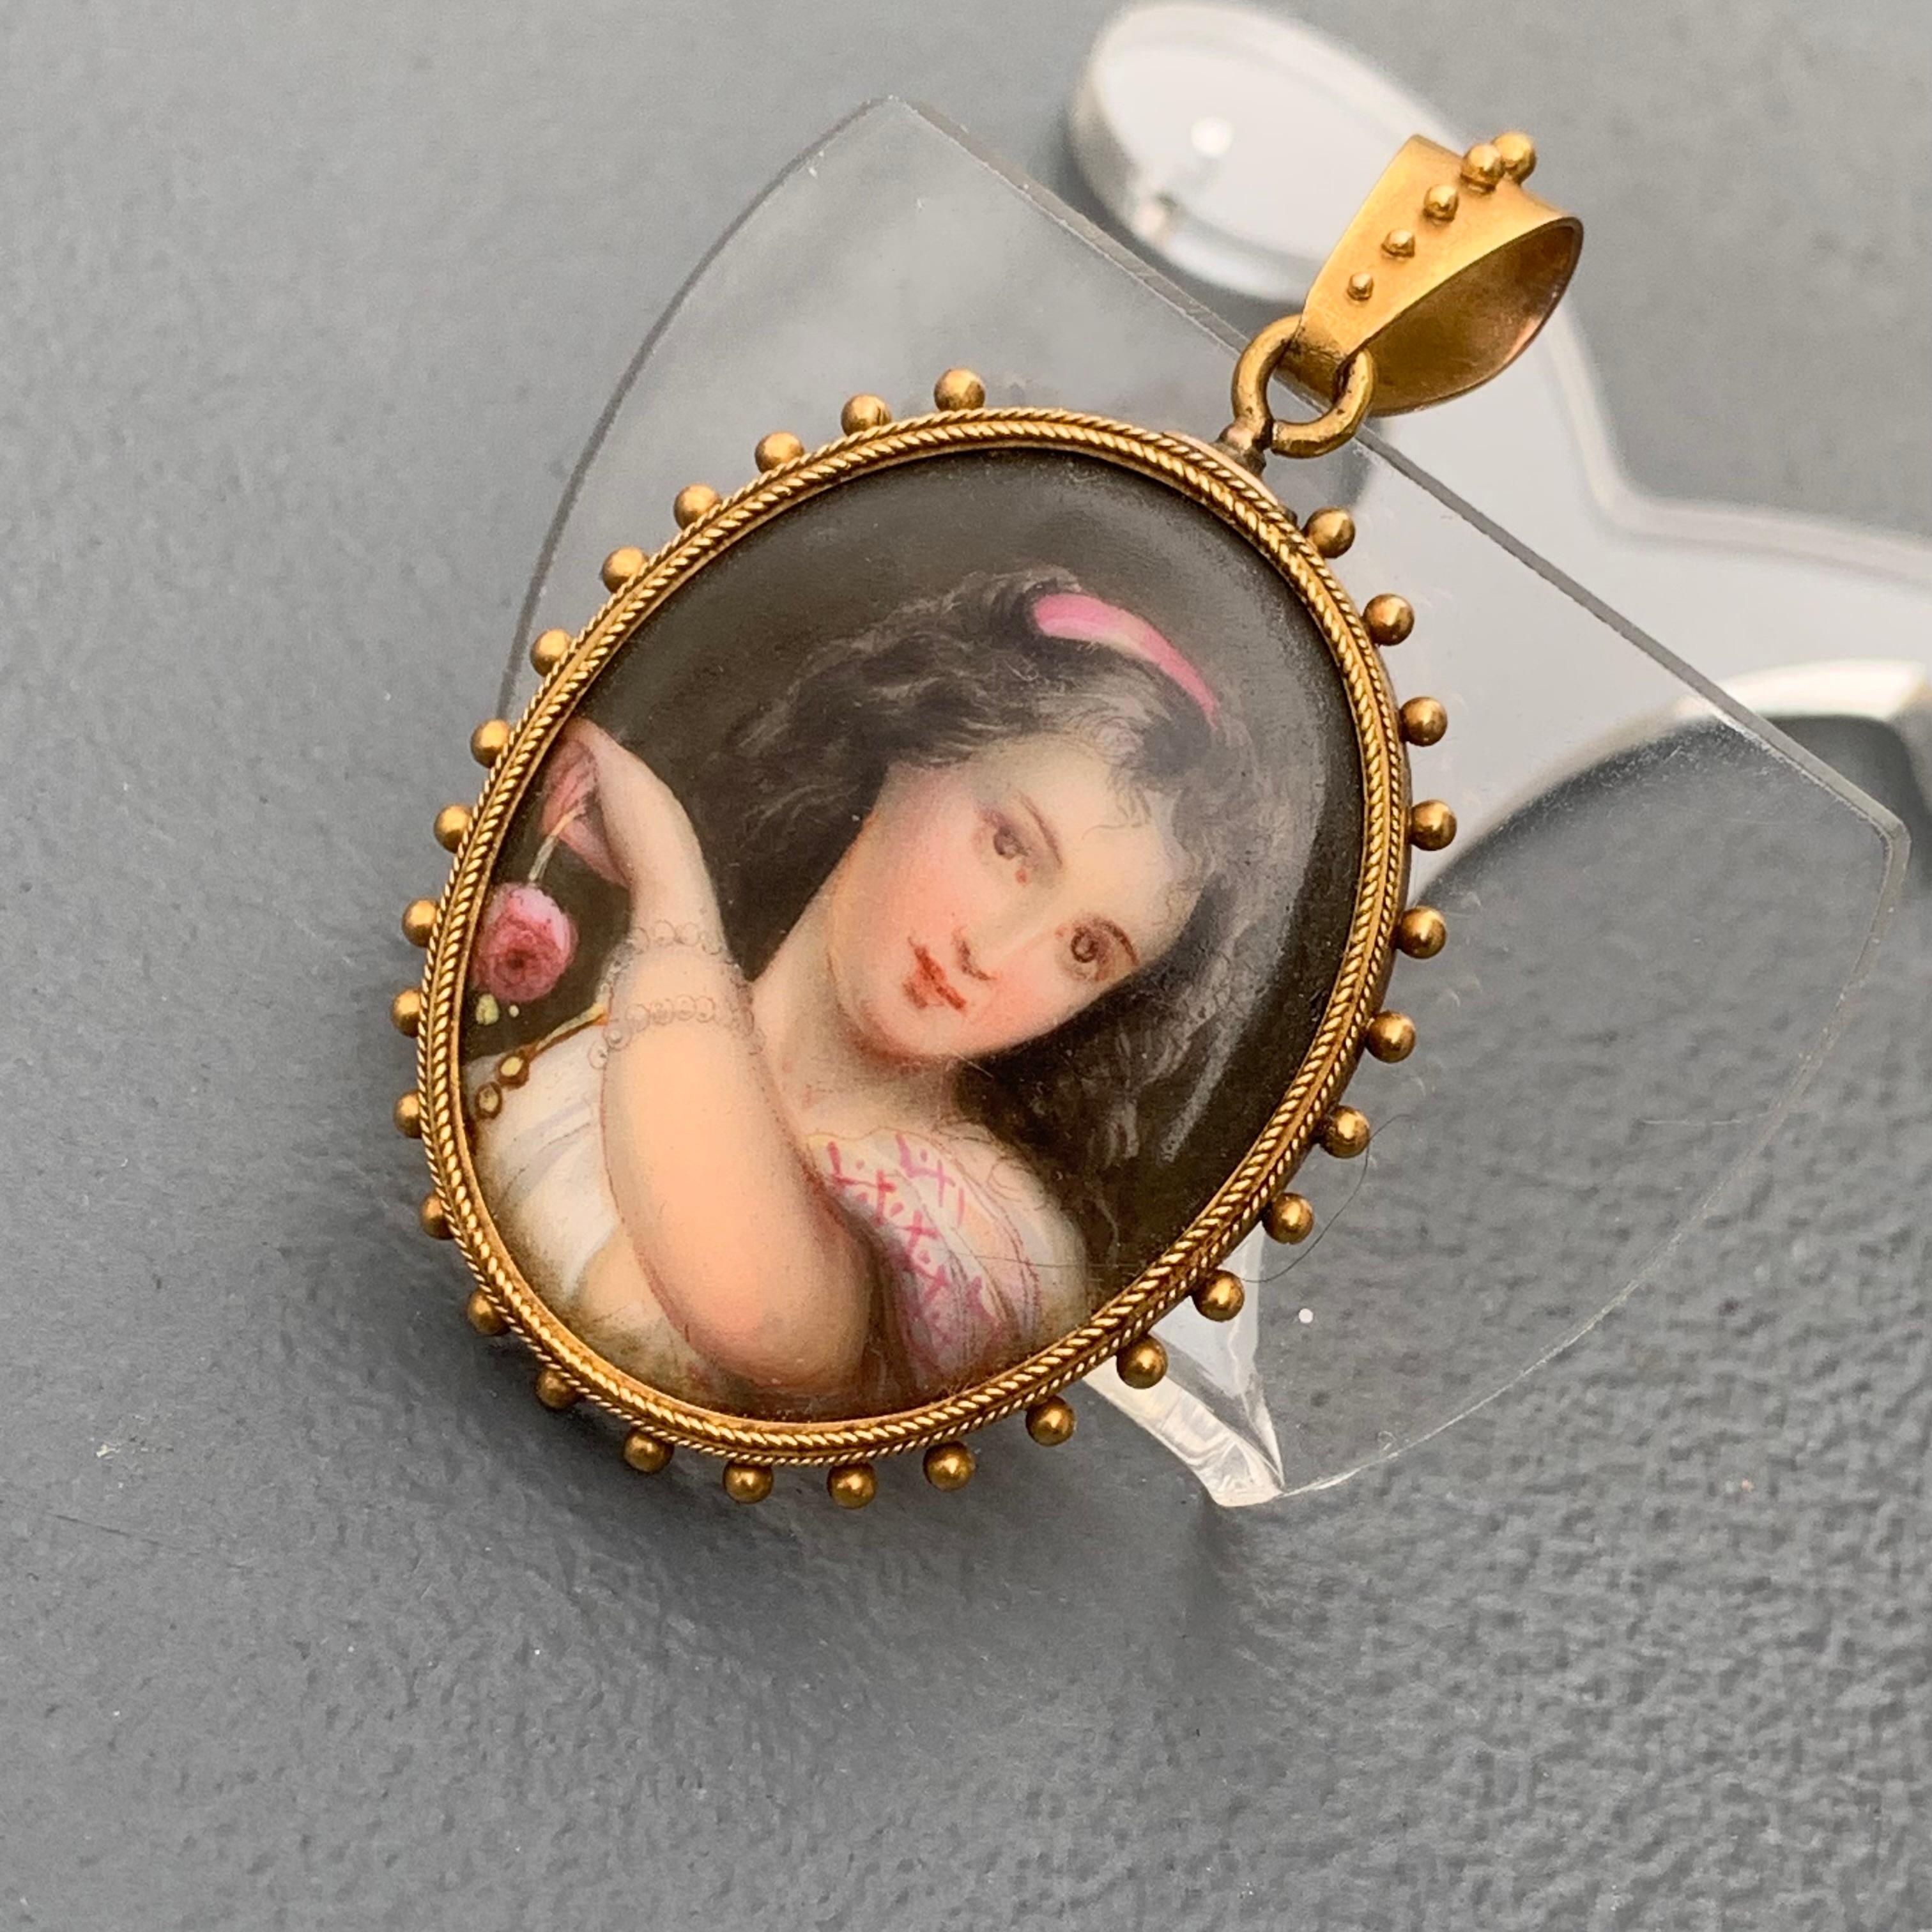 Gorgeous antique Victorian 14kt gold , hand painted girls miniature portrait pendant/ locket . Portrait is hand painted  with fine details on an ceramic plaque and features a beautiful young girl holding a rose in her hand with pearl bracelets .